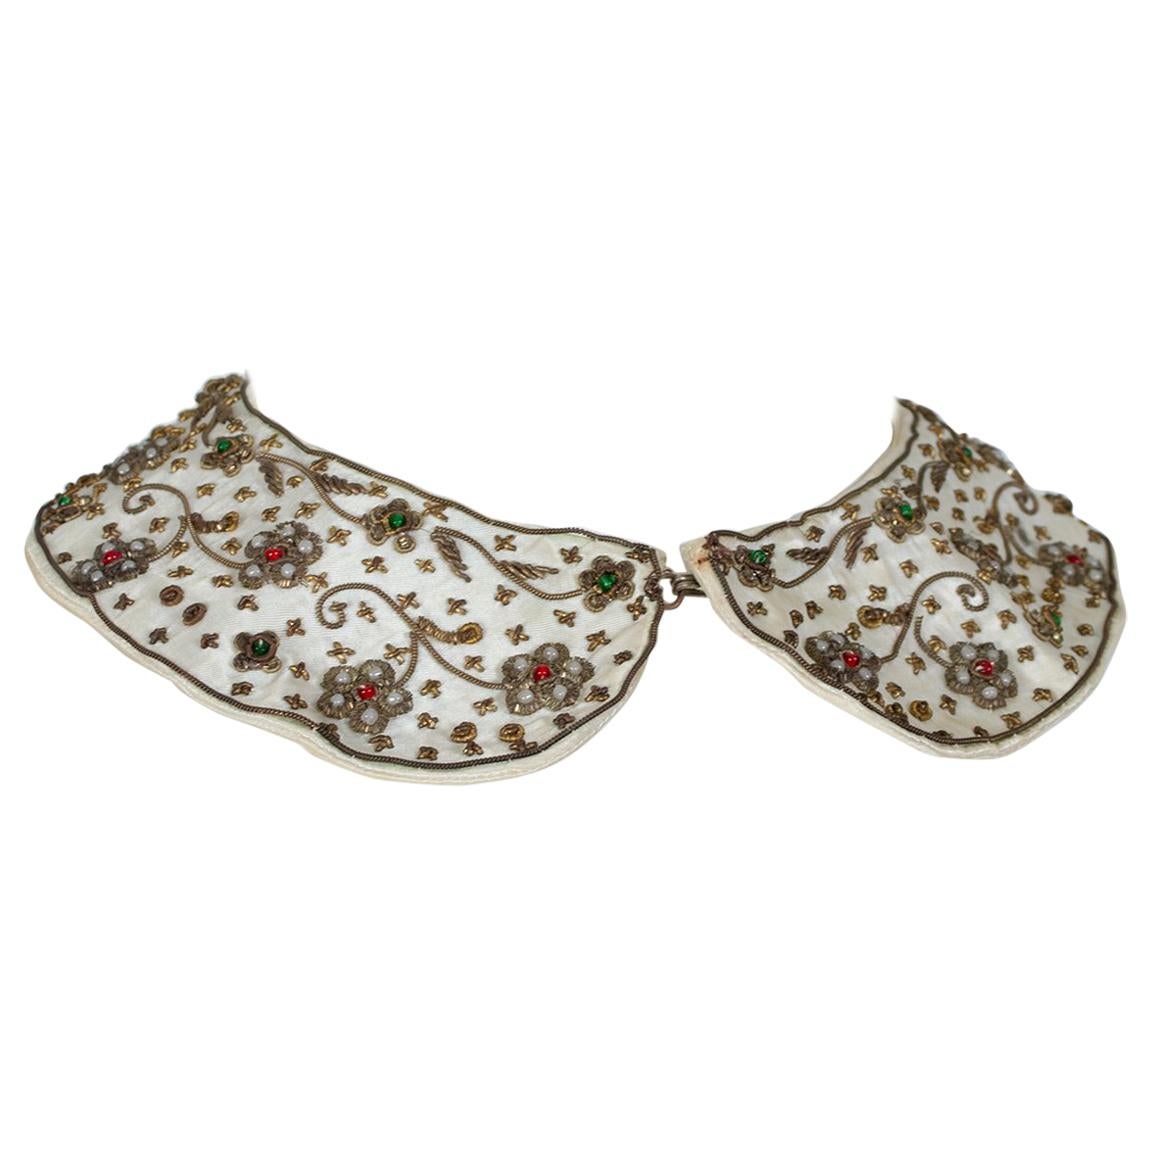 Zardozi Embroidered Wire and Satin Peter Pan Collar, 1950s